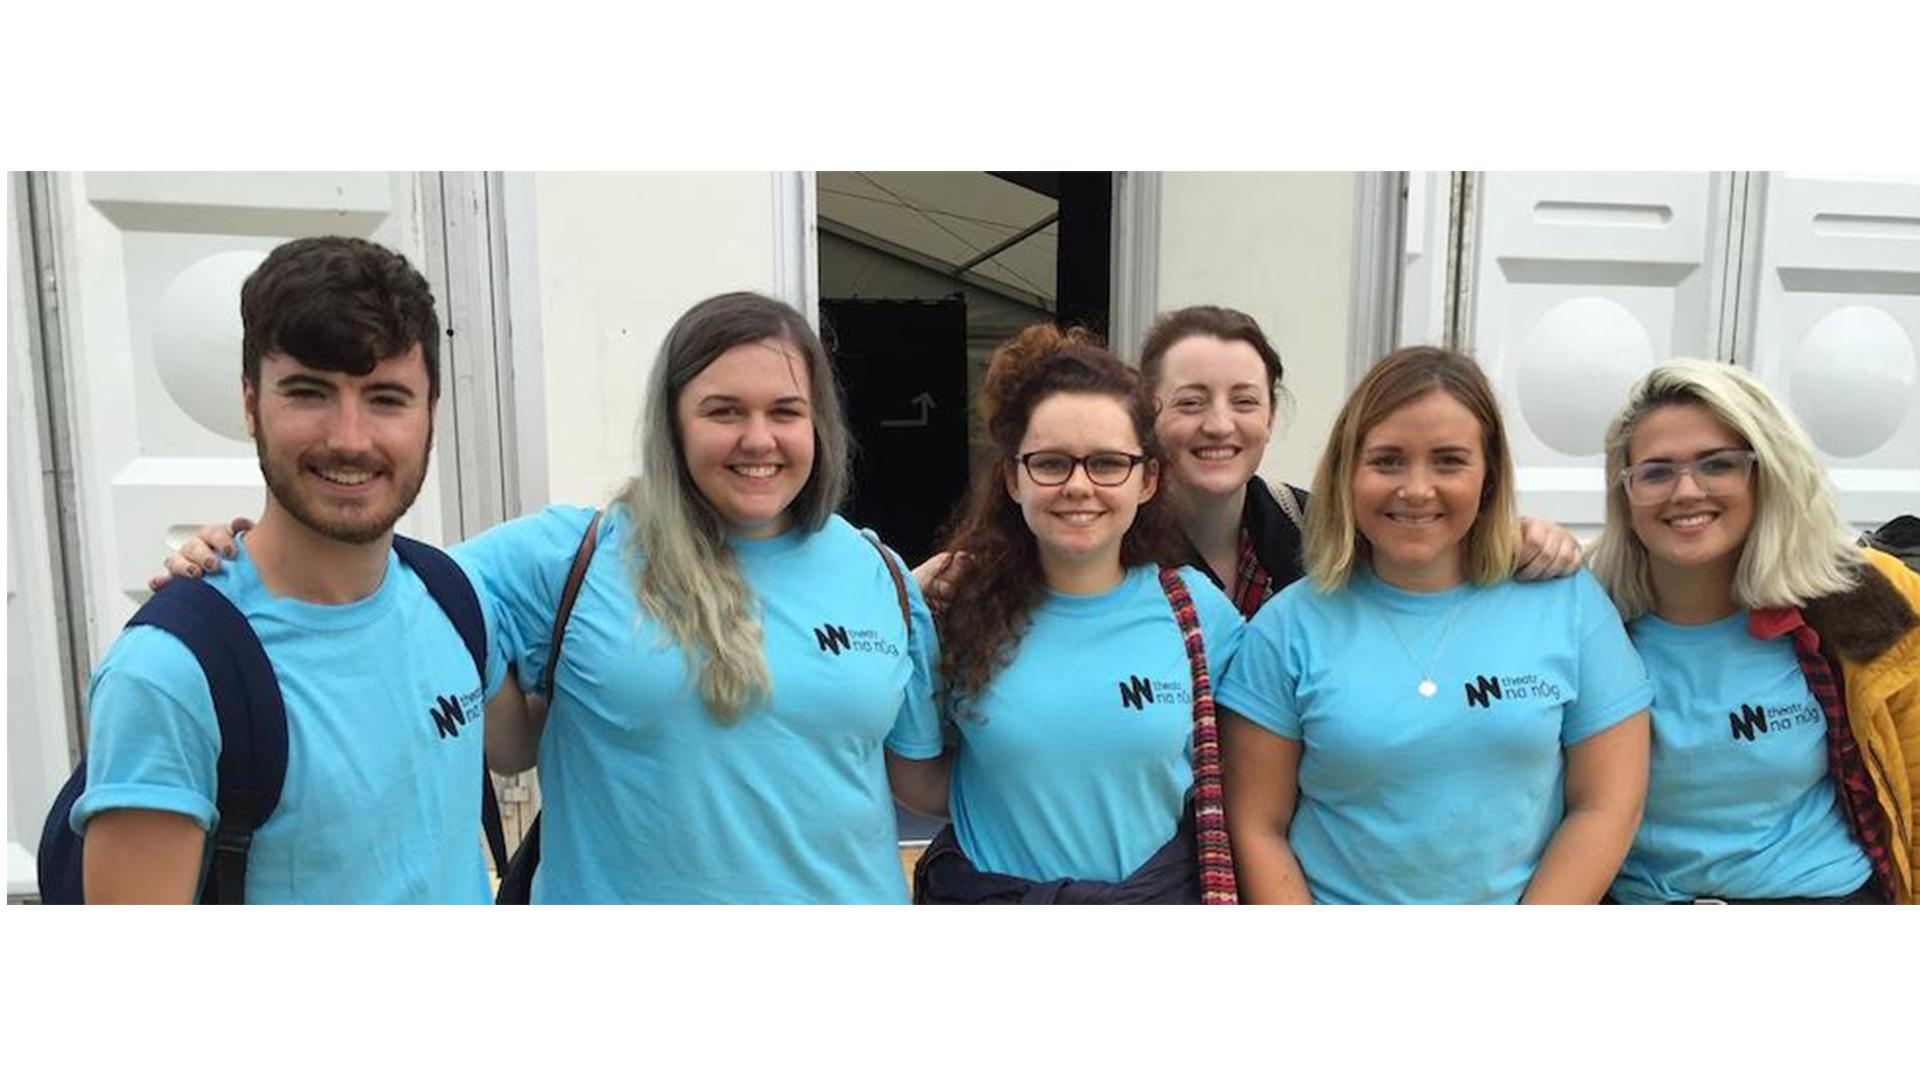 Six young people wearing blue Theatr na nÓg t-shirts